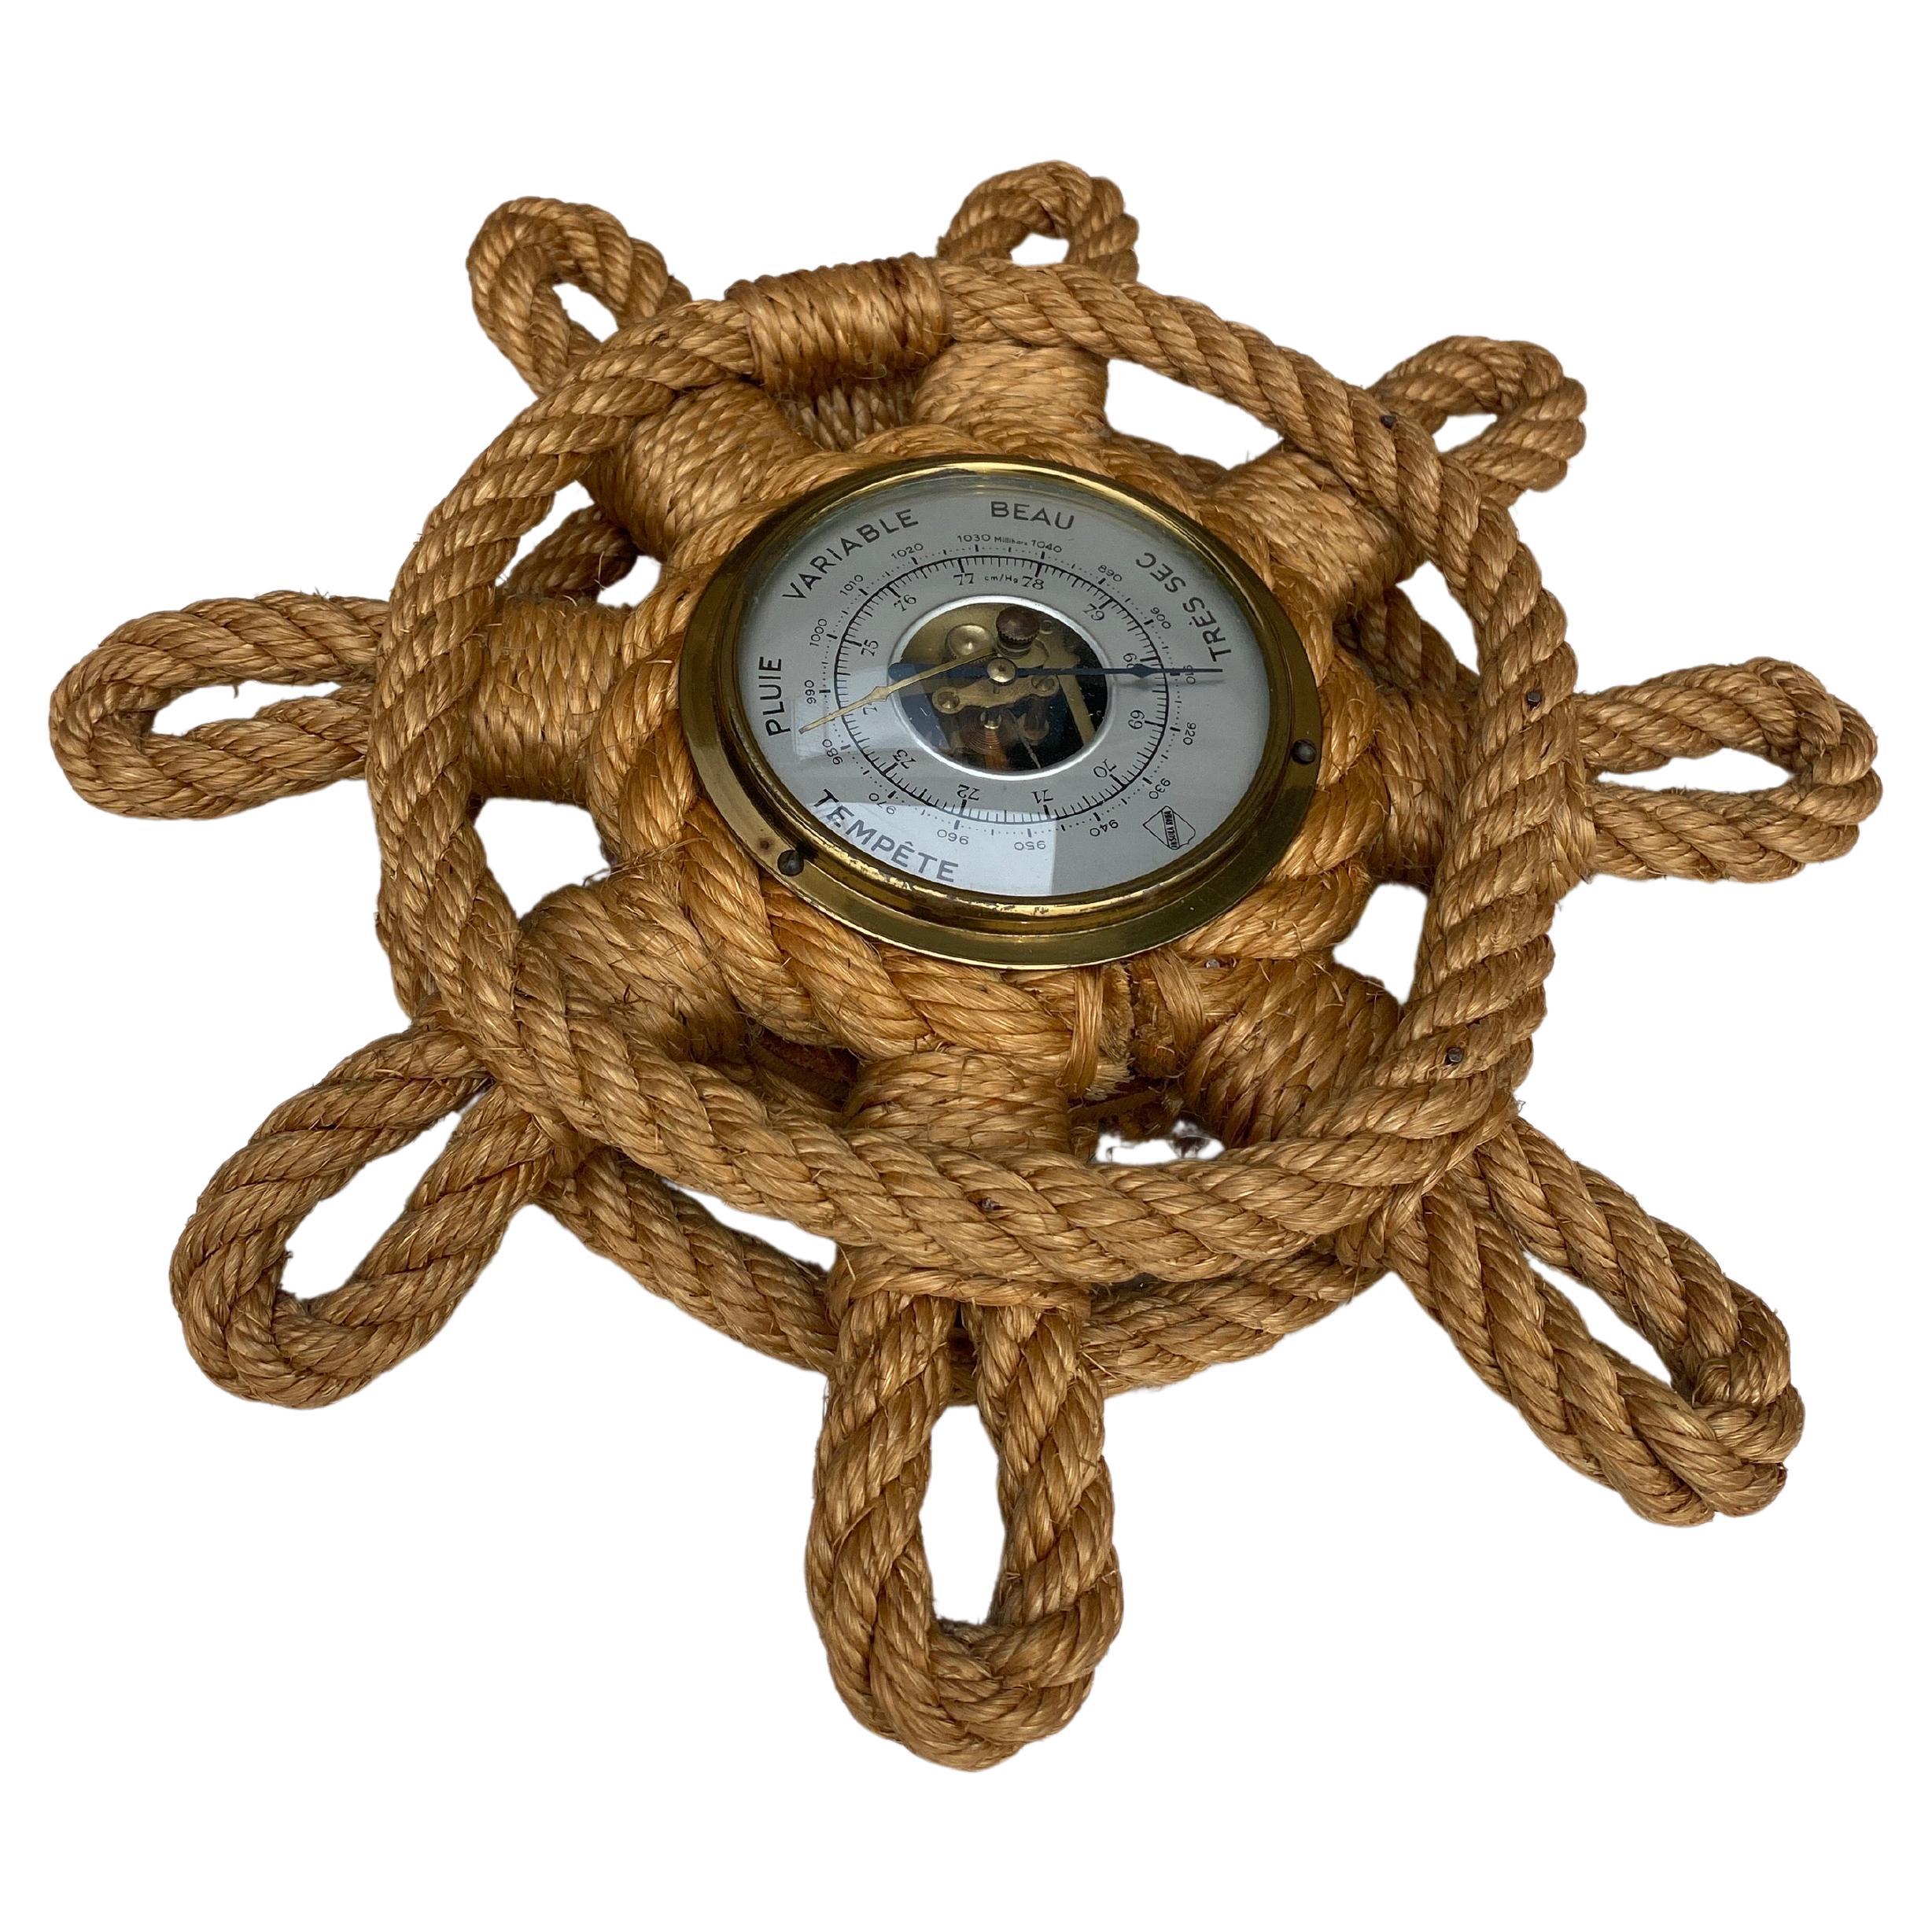 Rope barometer in a flower shape Audoux Minet, circa 1960.